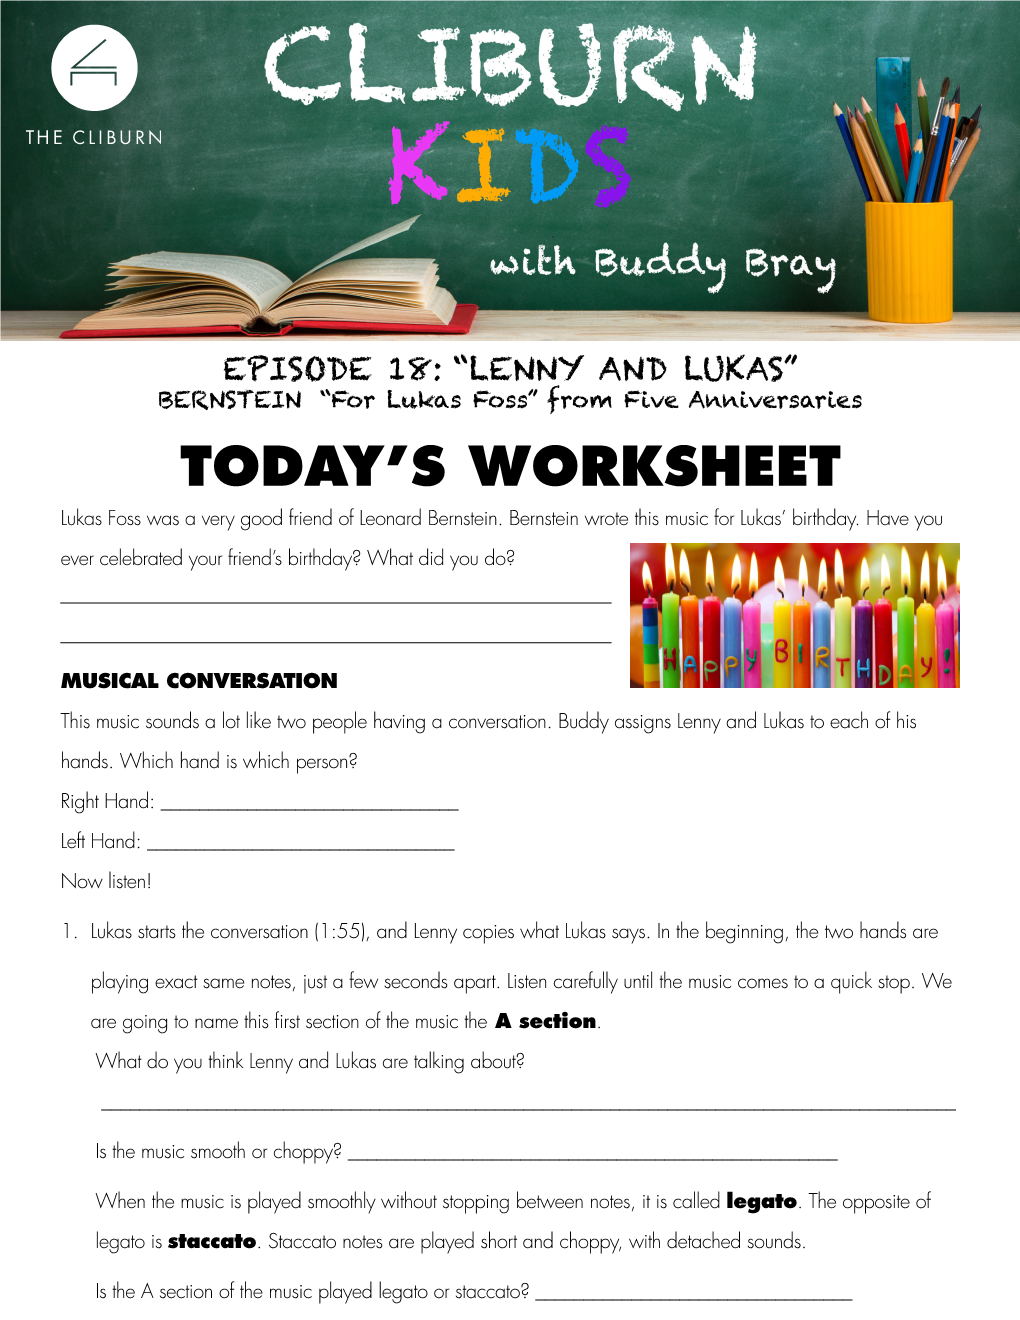 Today's Worksheet